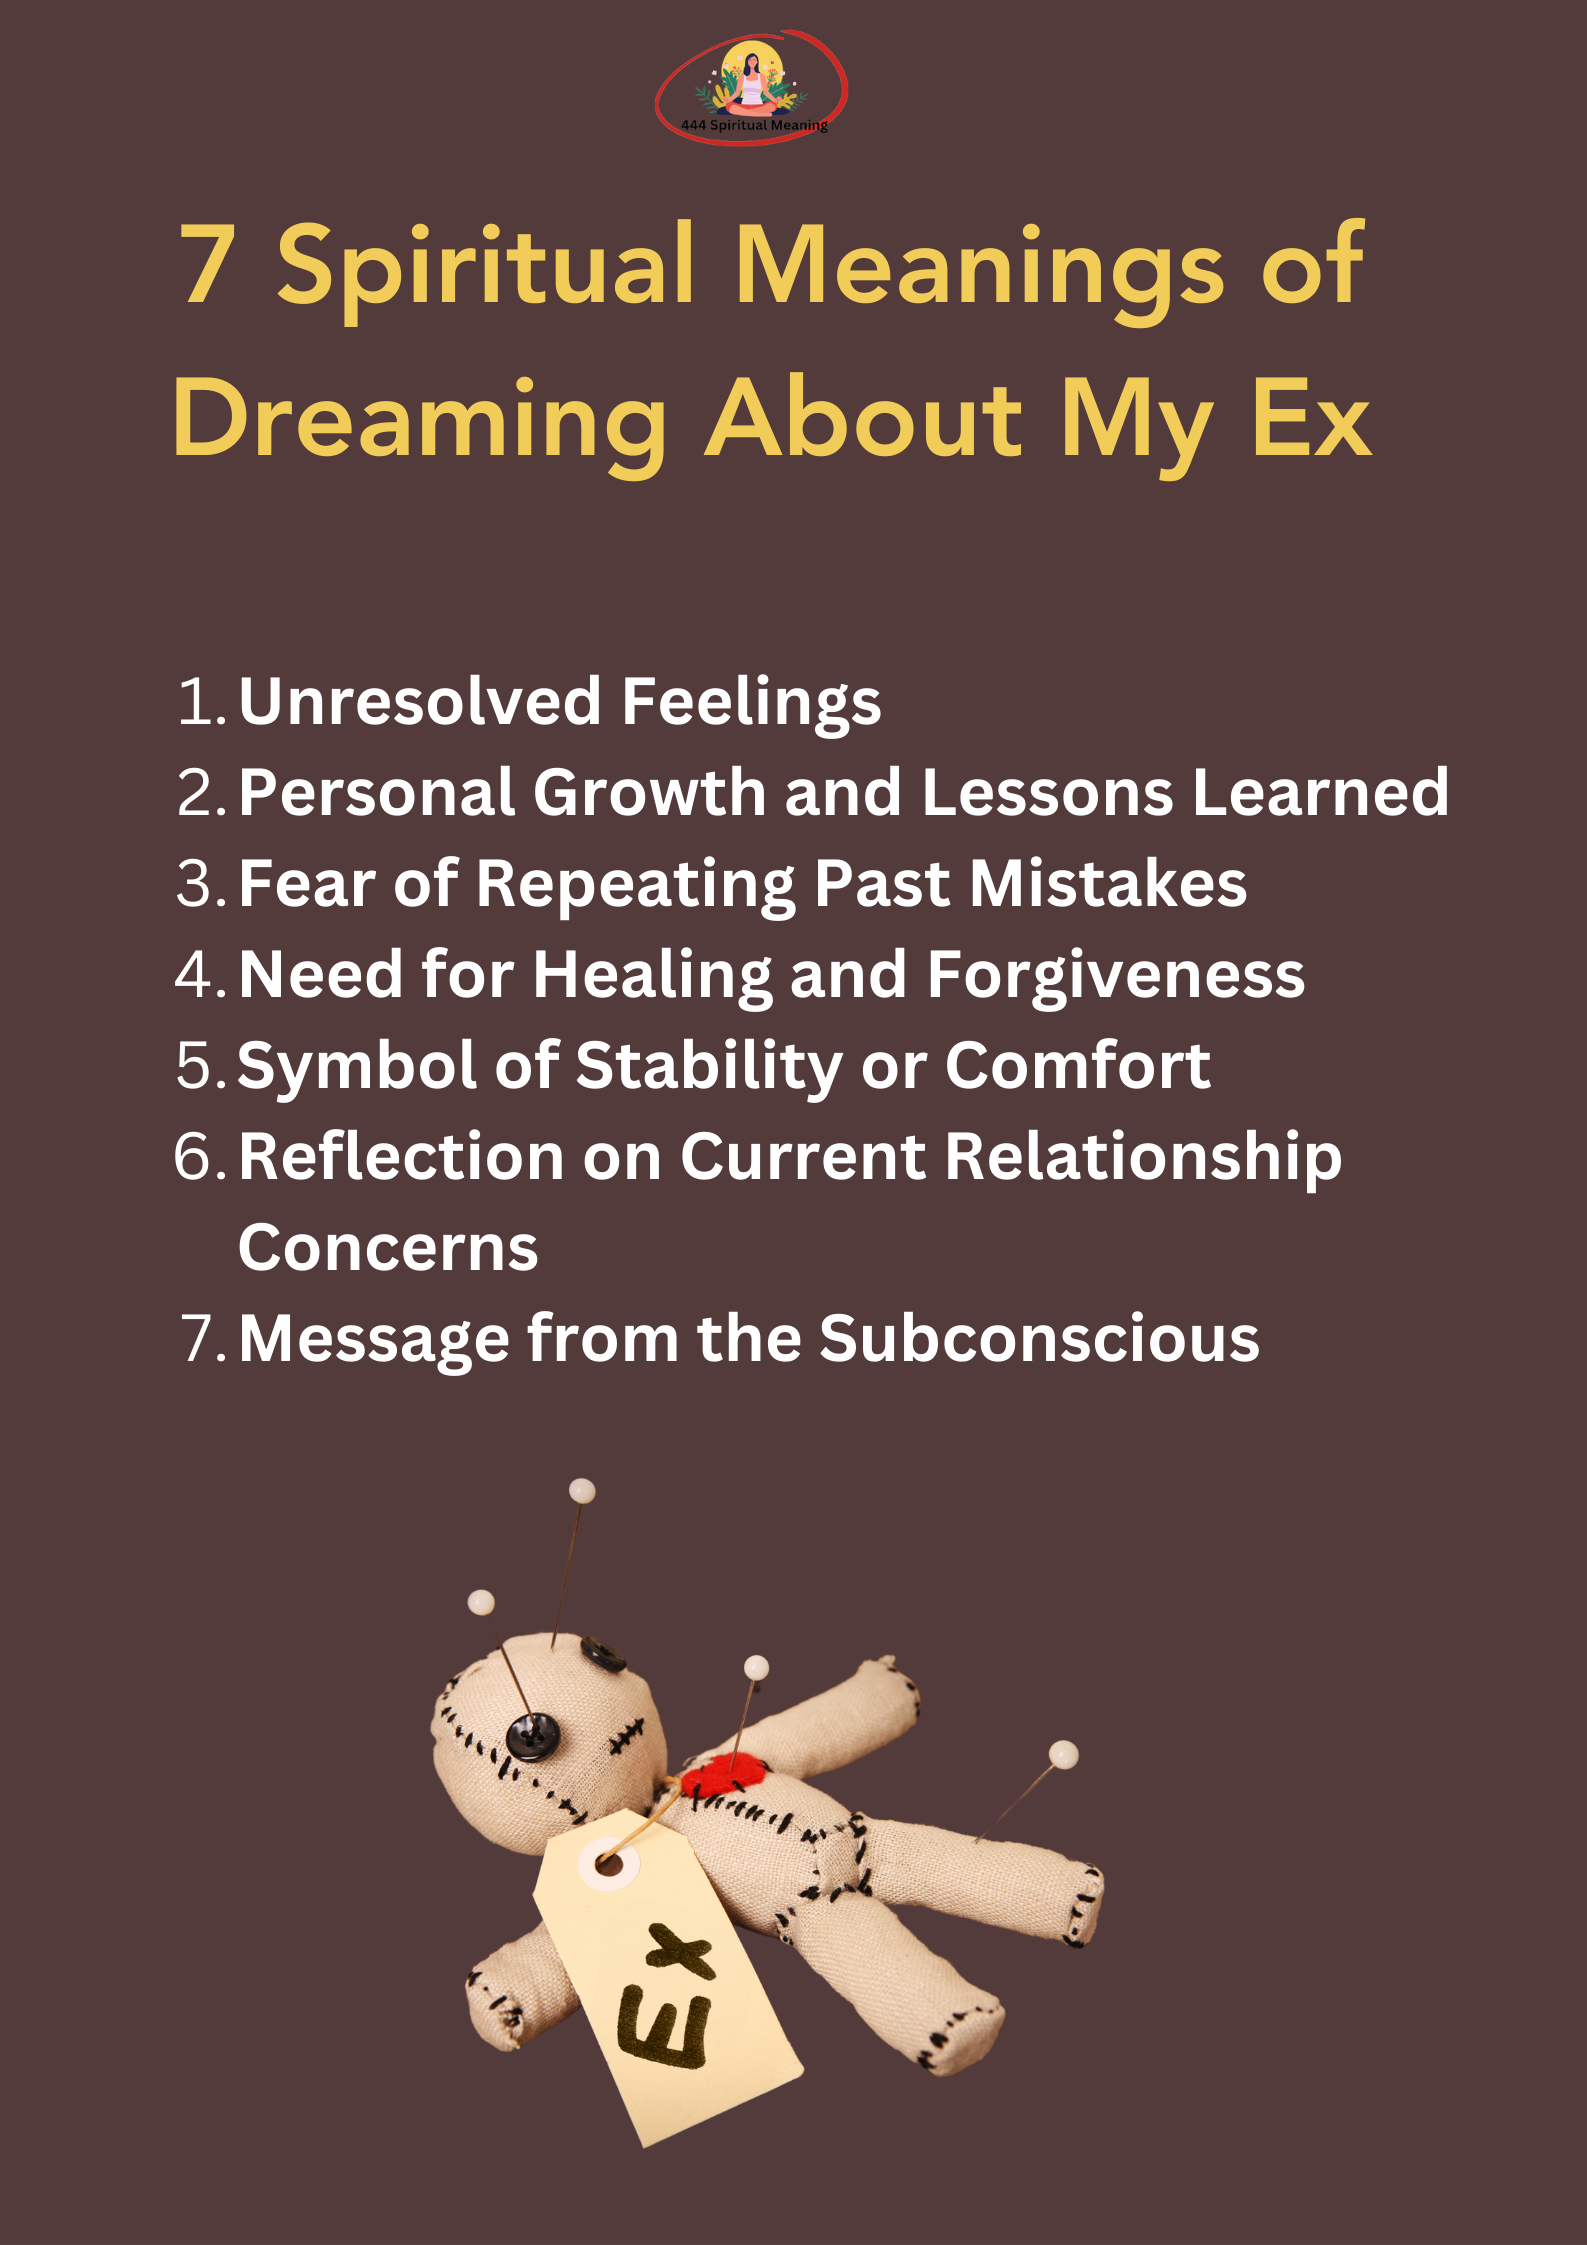 7 Spiritual Meanings of Dreaming About My Ex